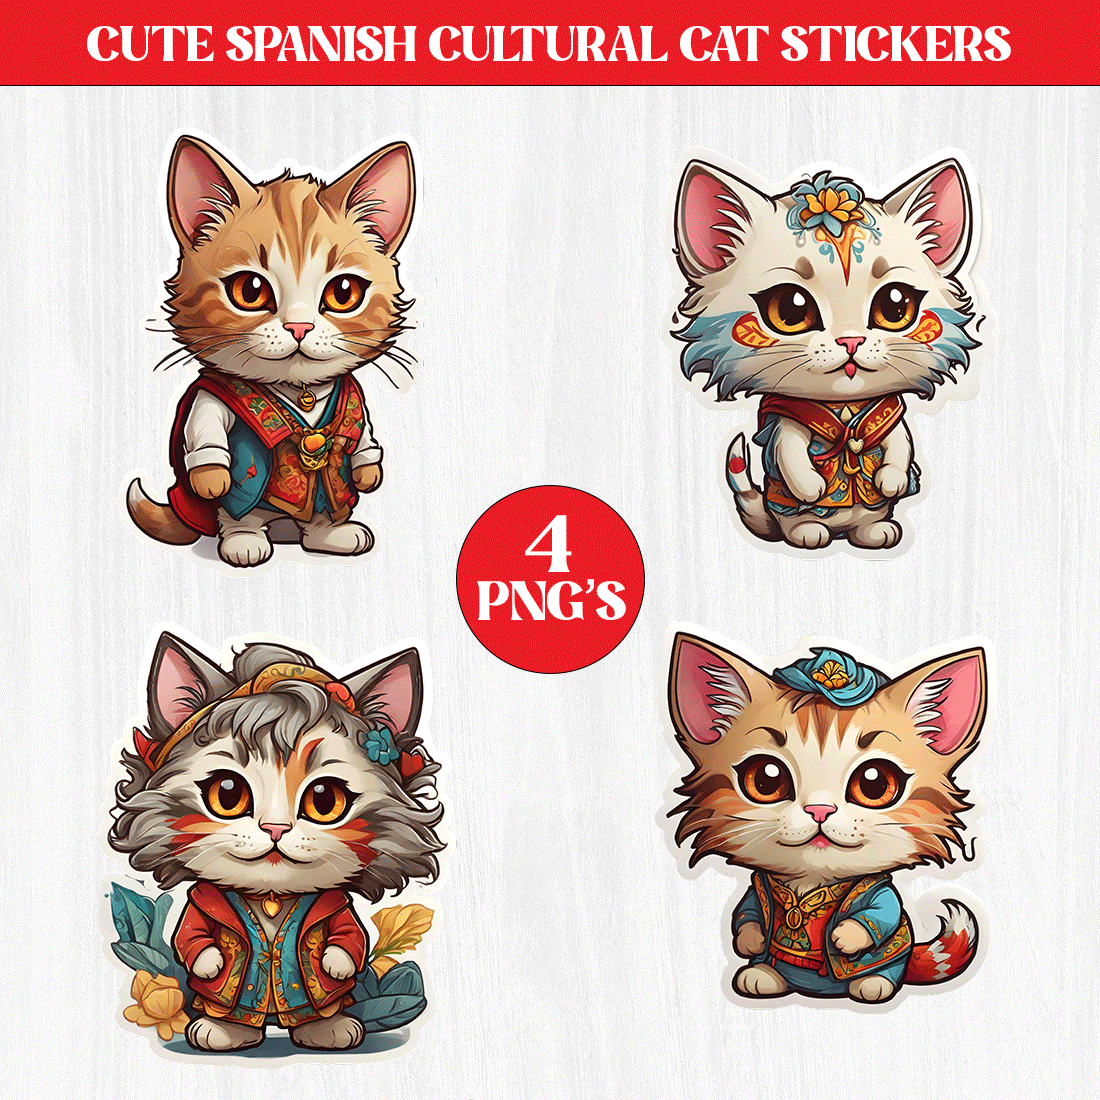 Cute Spanish Cultural Cat Stickers PNG’s cover image.